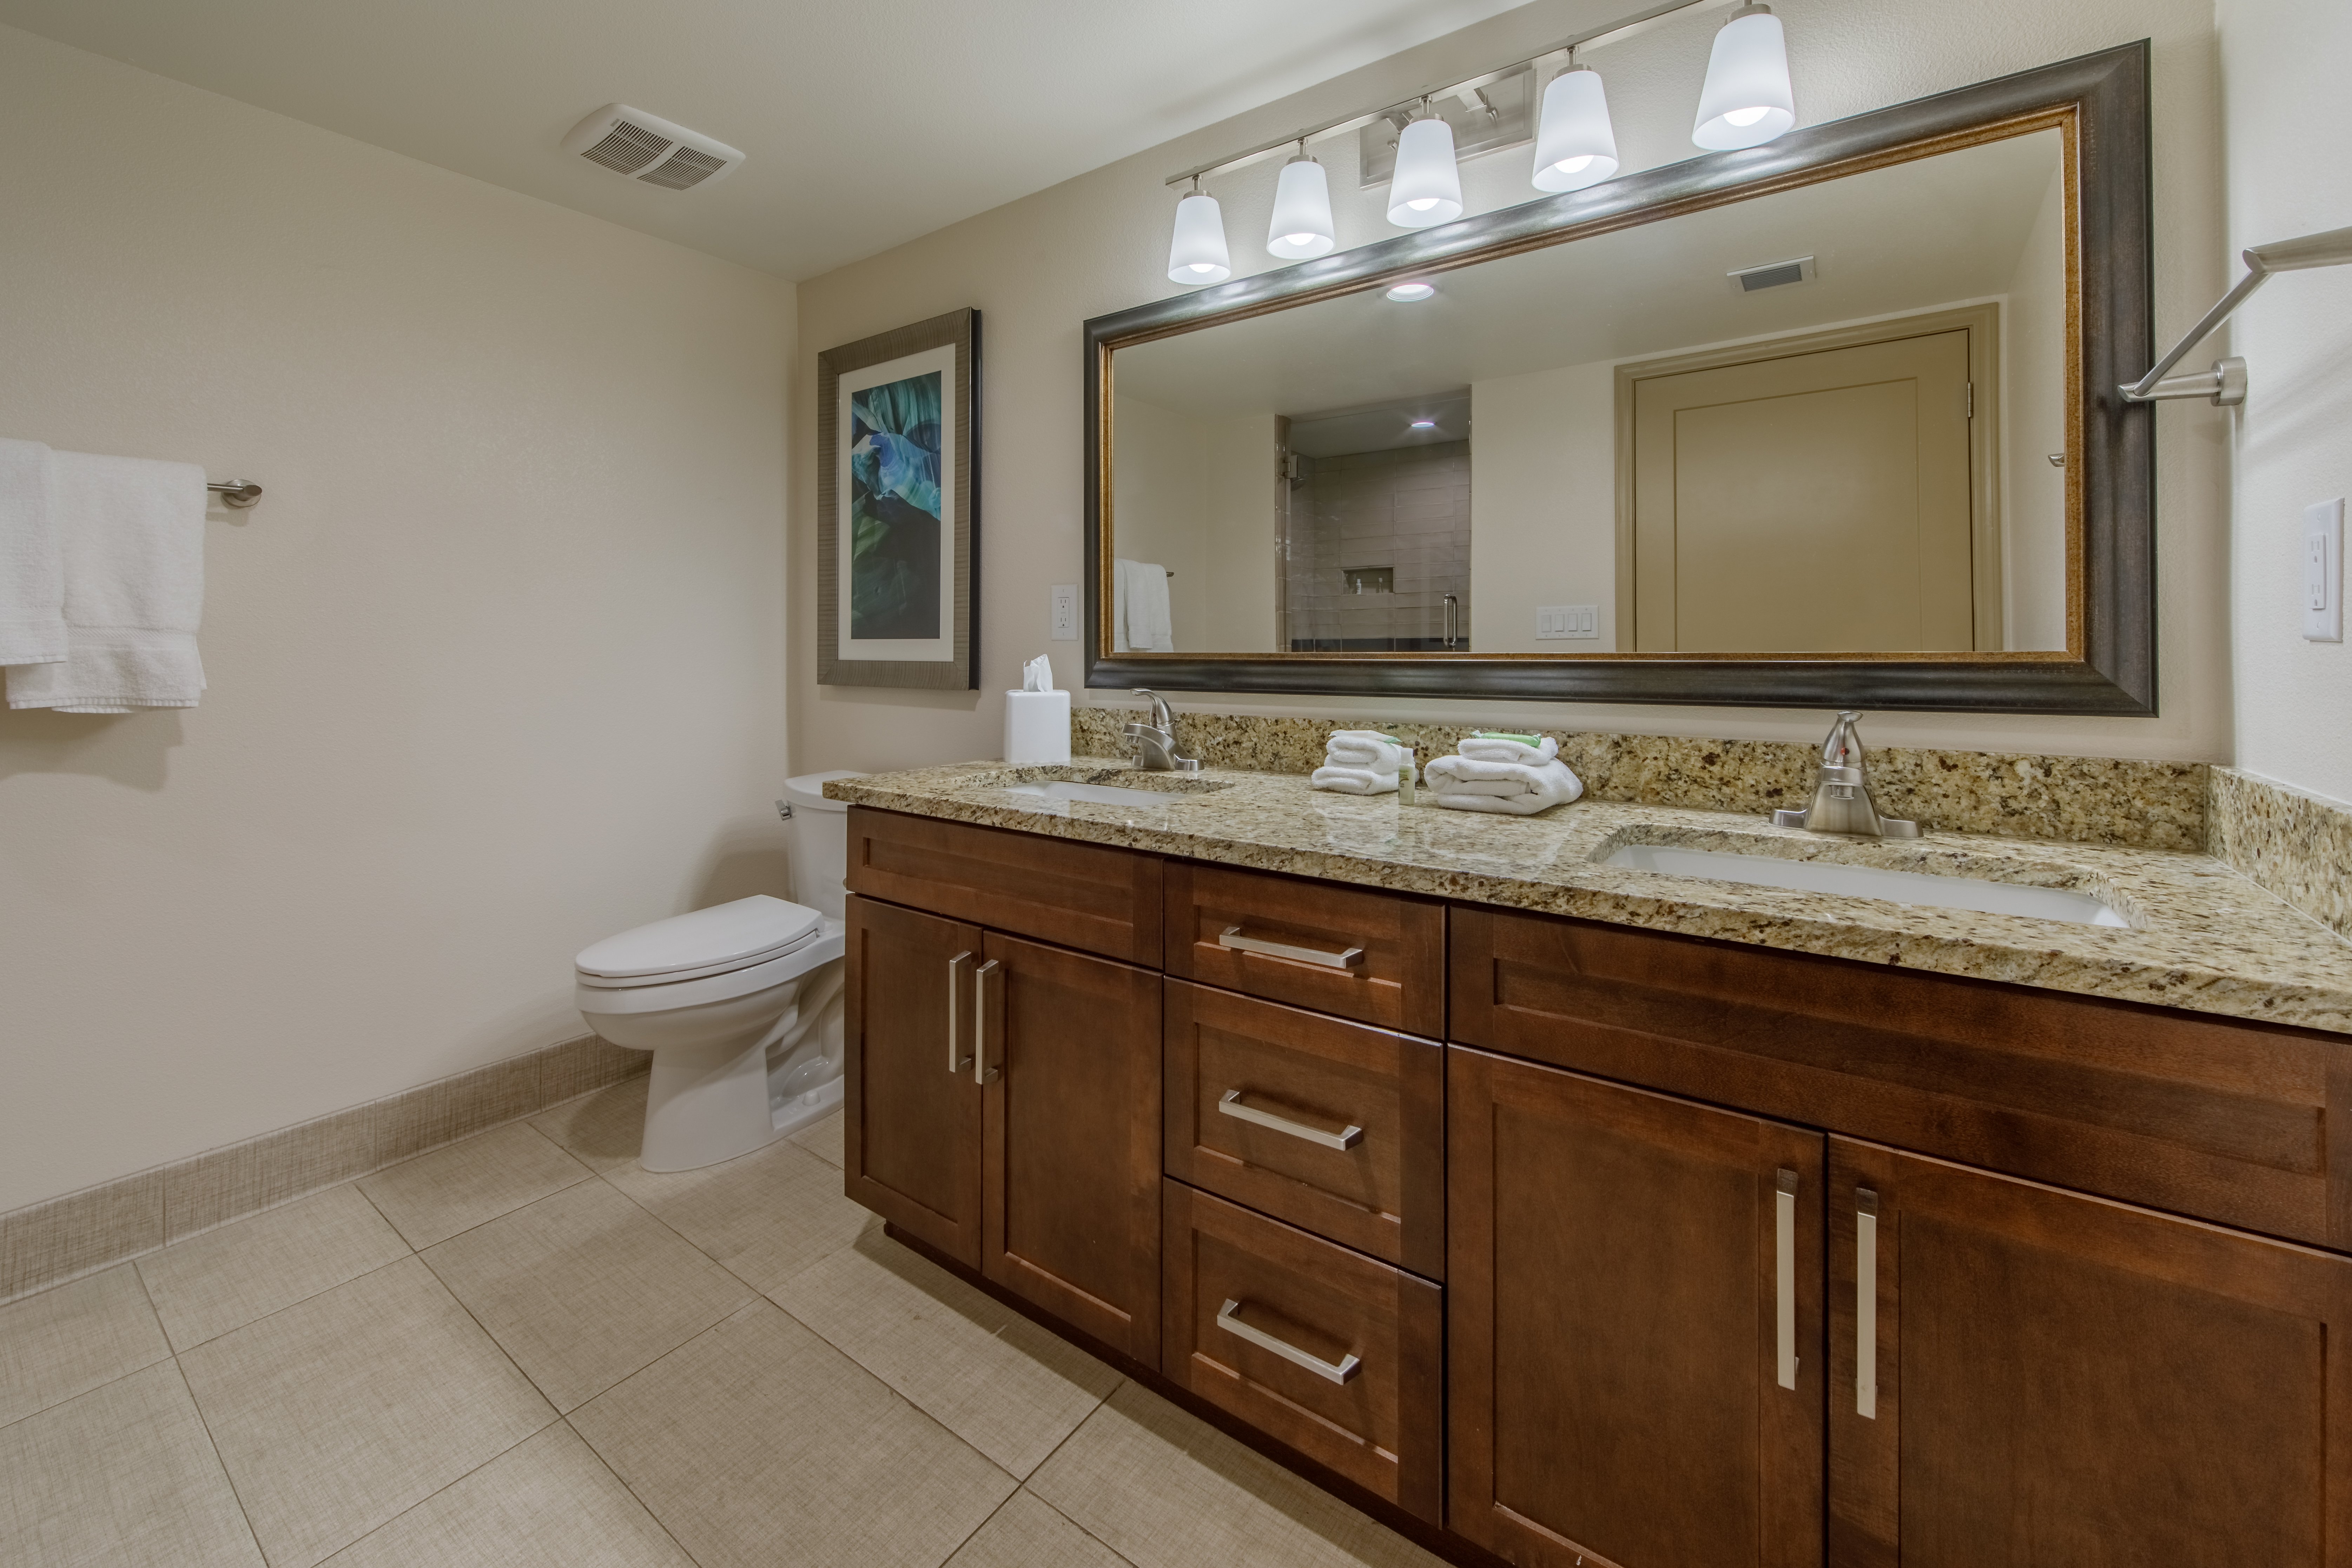 Master bathroom offers 2 sinks with plenty of counter space